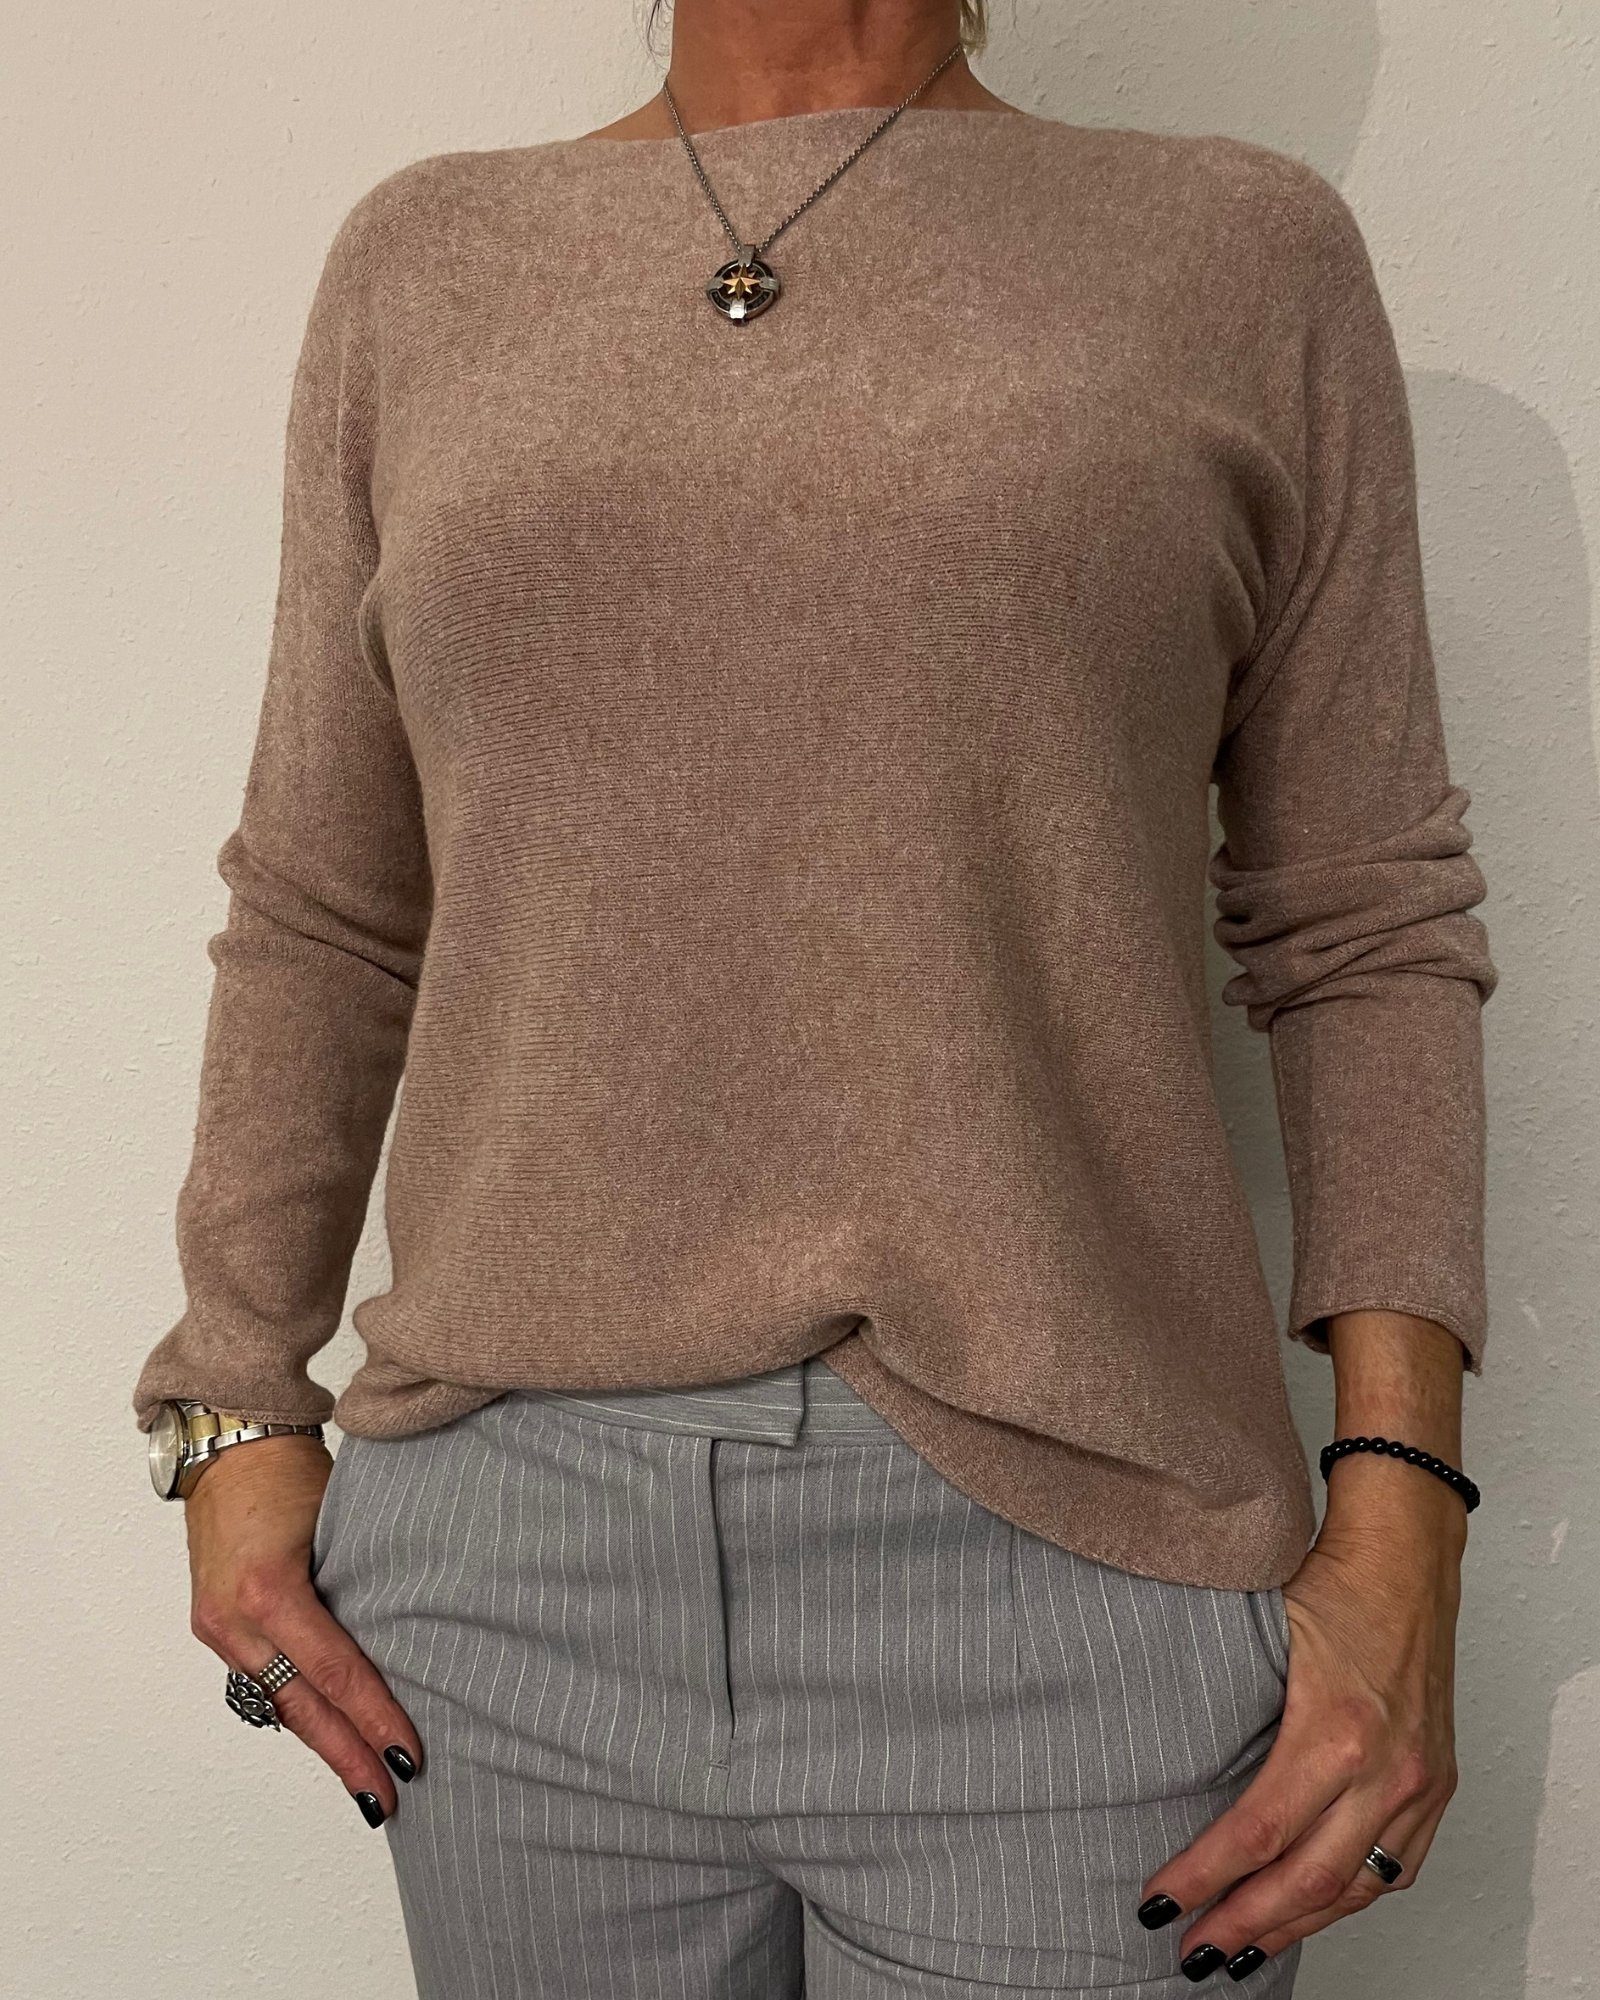 VIBES - ONE U-Boot hier Gr. taupe XL Pullover Strickpullover Ausschnitt - SIZE - S passt Basic LIV ITALY -